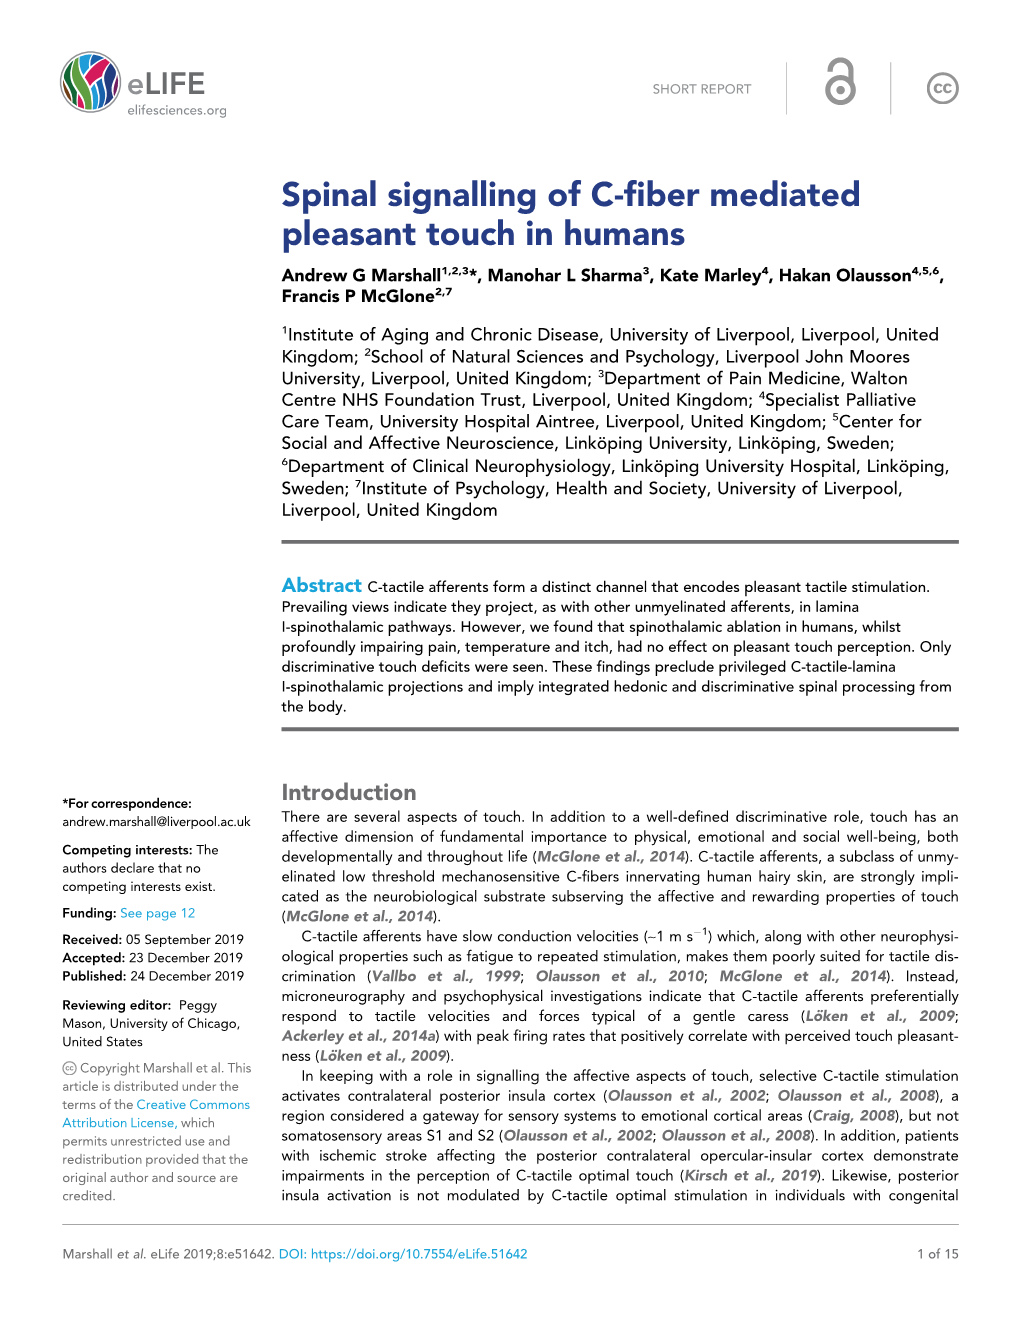 Spinal Signalling of C-Fiber Mediated Pleasant Touch in Humans Andrew G Marshall1,2,3*, Manohar L Sharma3, Kate Marley4, Hakan Olausson4,5,6, Francis P Mcglone2,7